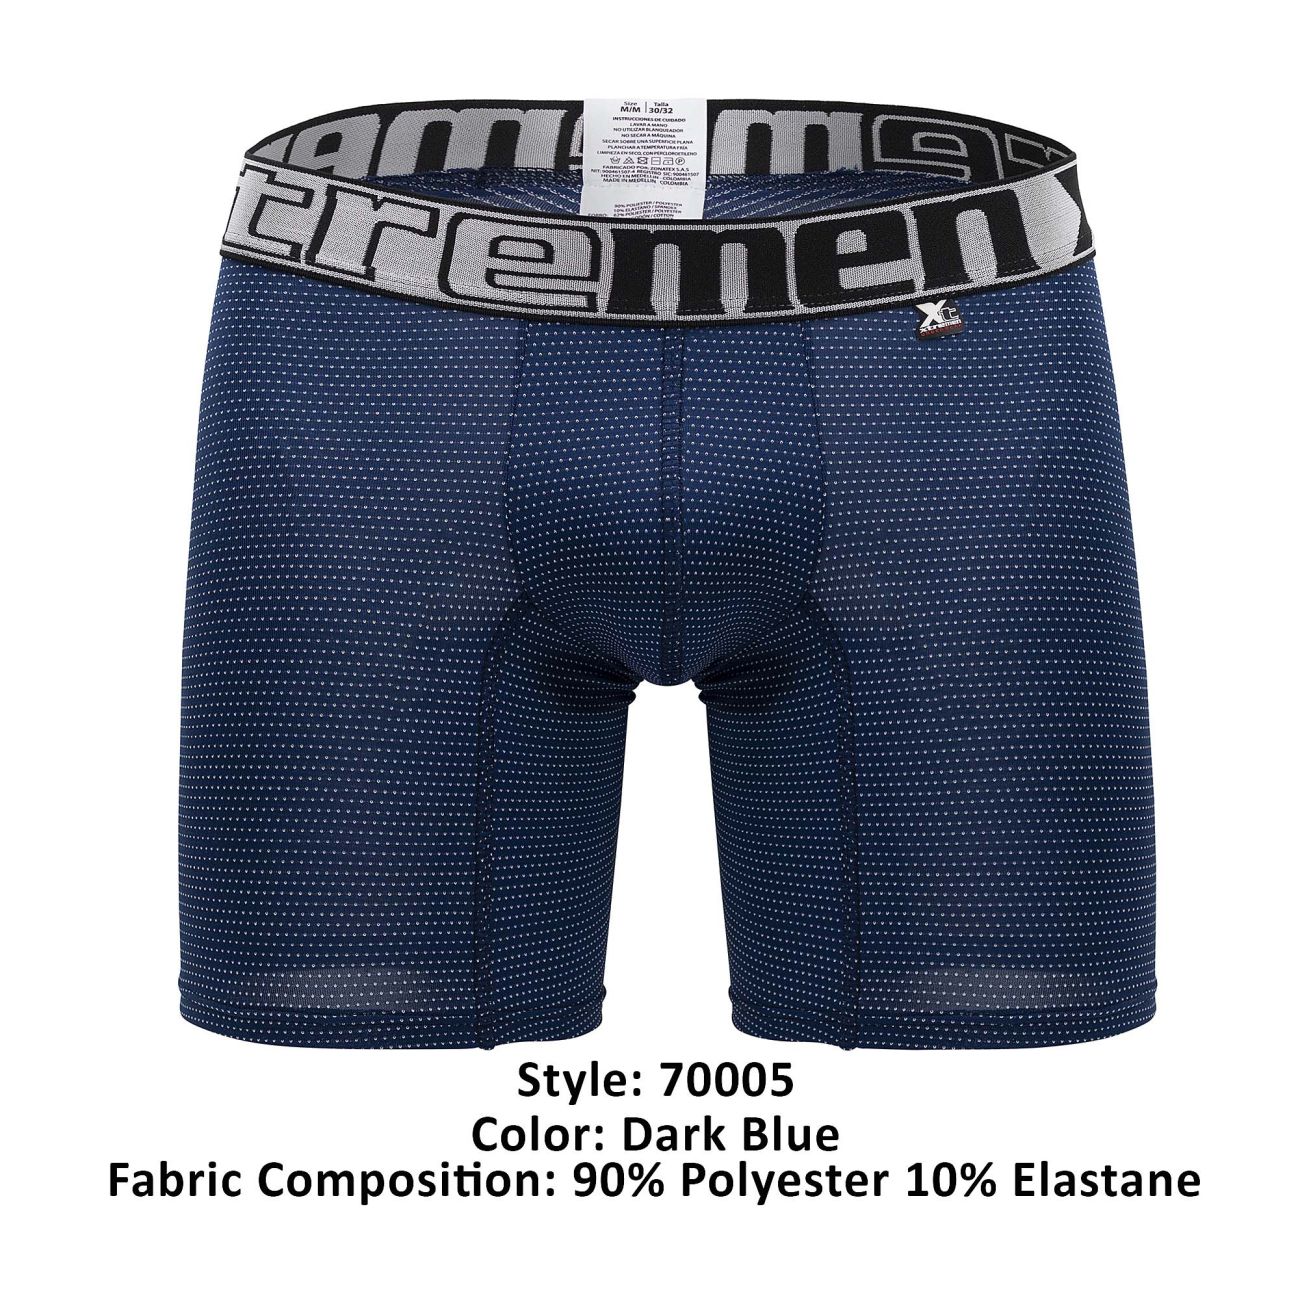 Final Clearance Men's Underwear and Lingerie Boxer Briefs and Trunks for men